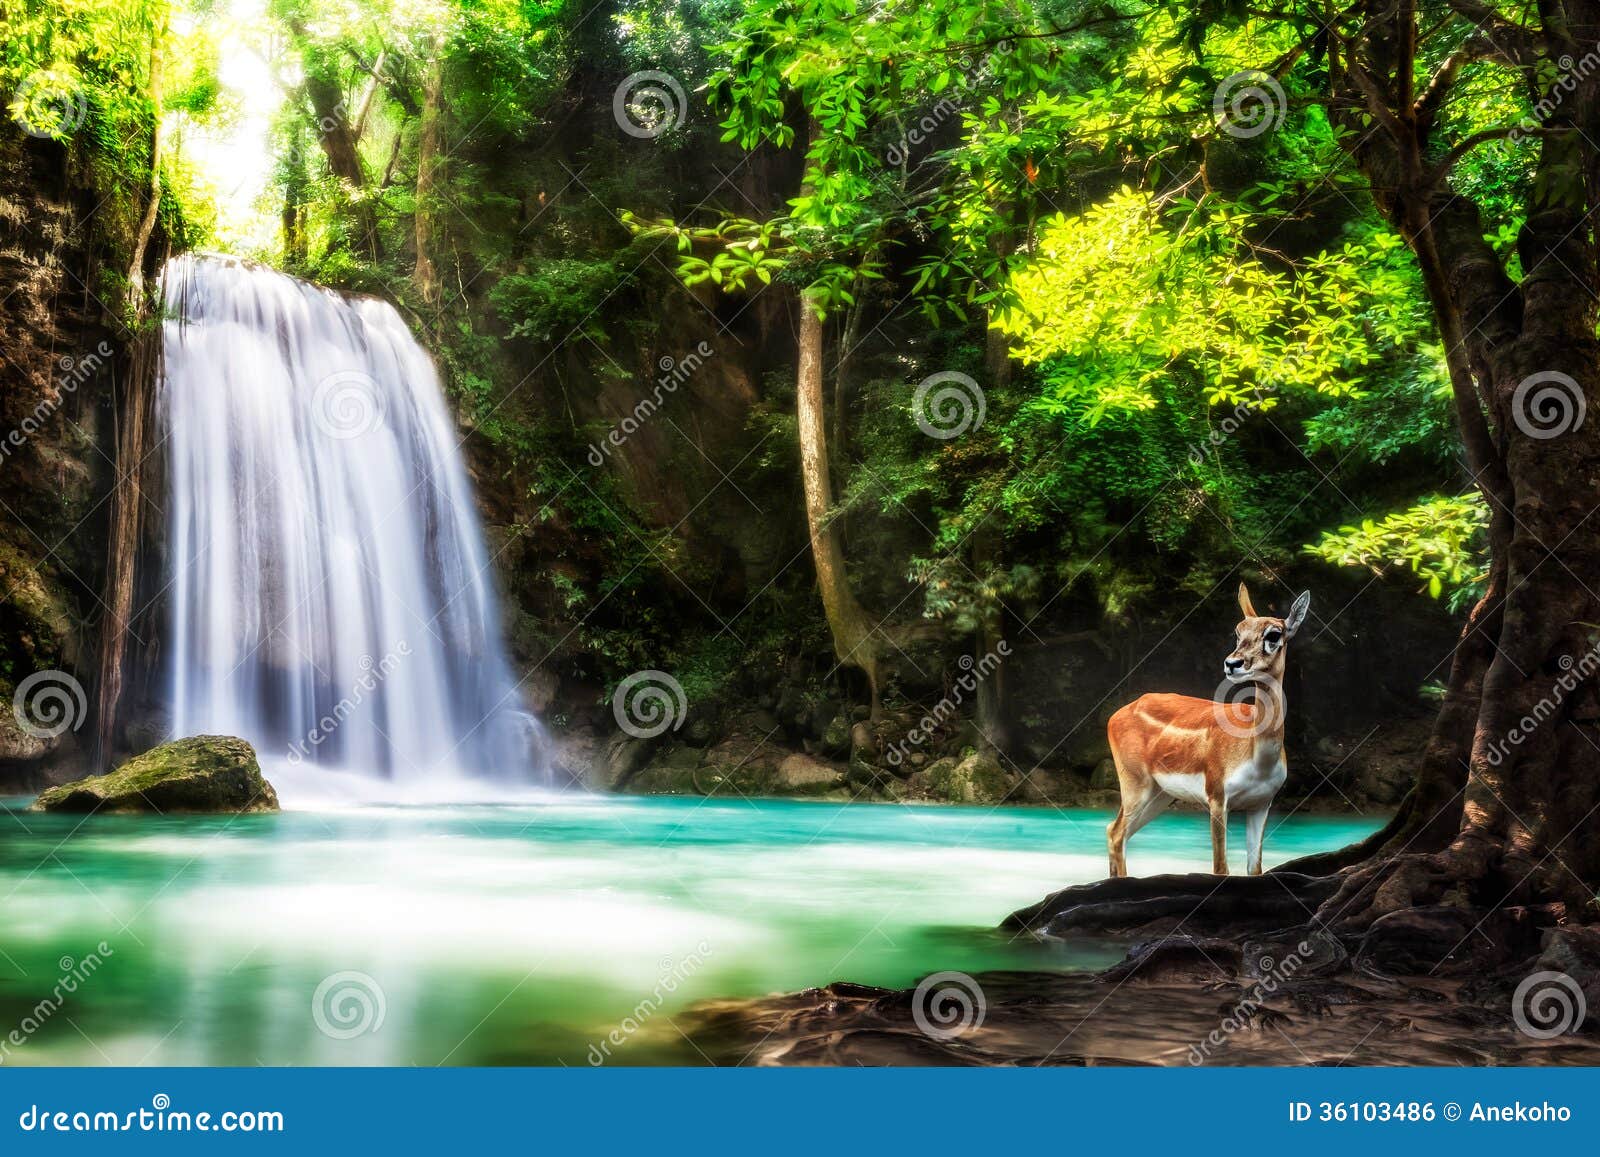 13,024 Waterfall Animal Stock Photos - Free & Royalty-Free Stock Photos  from Dreamstime